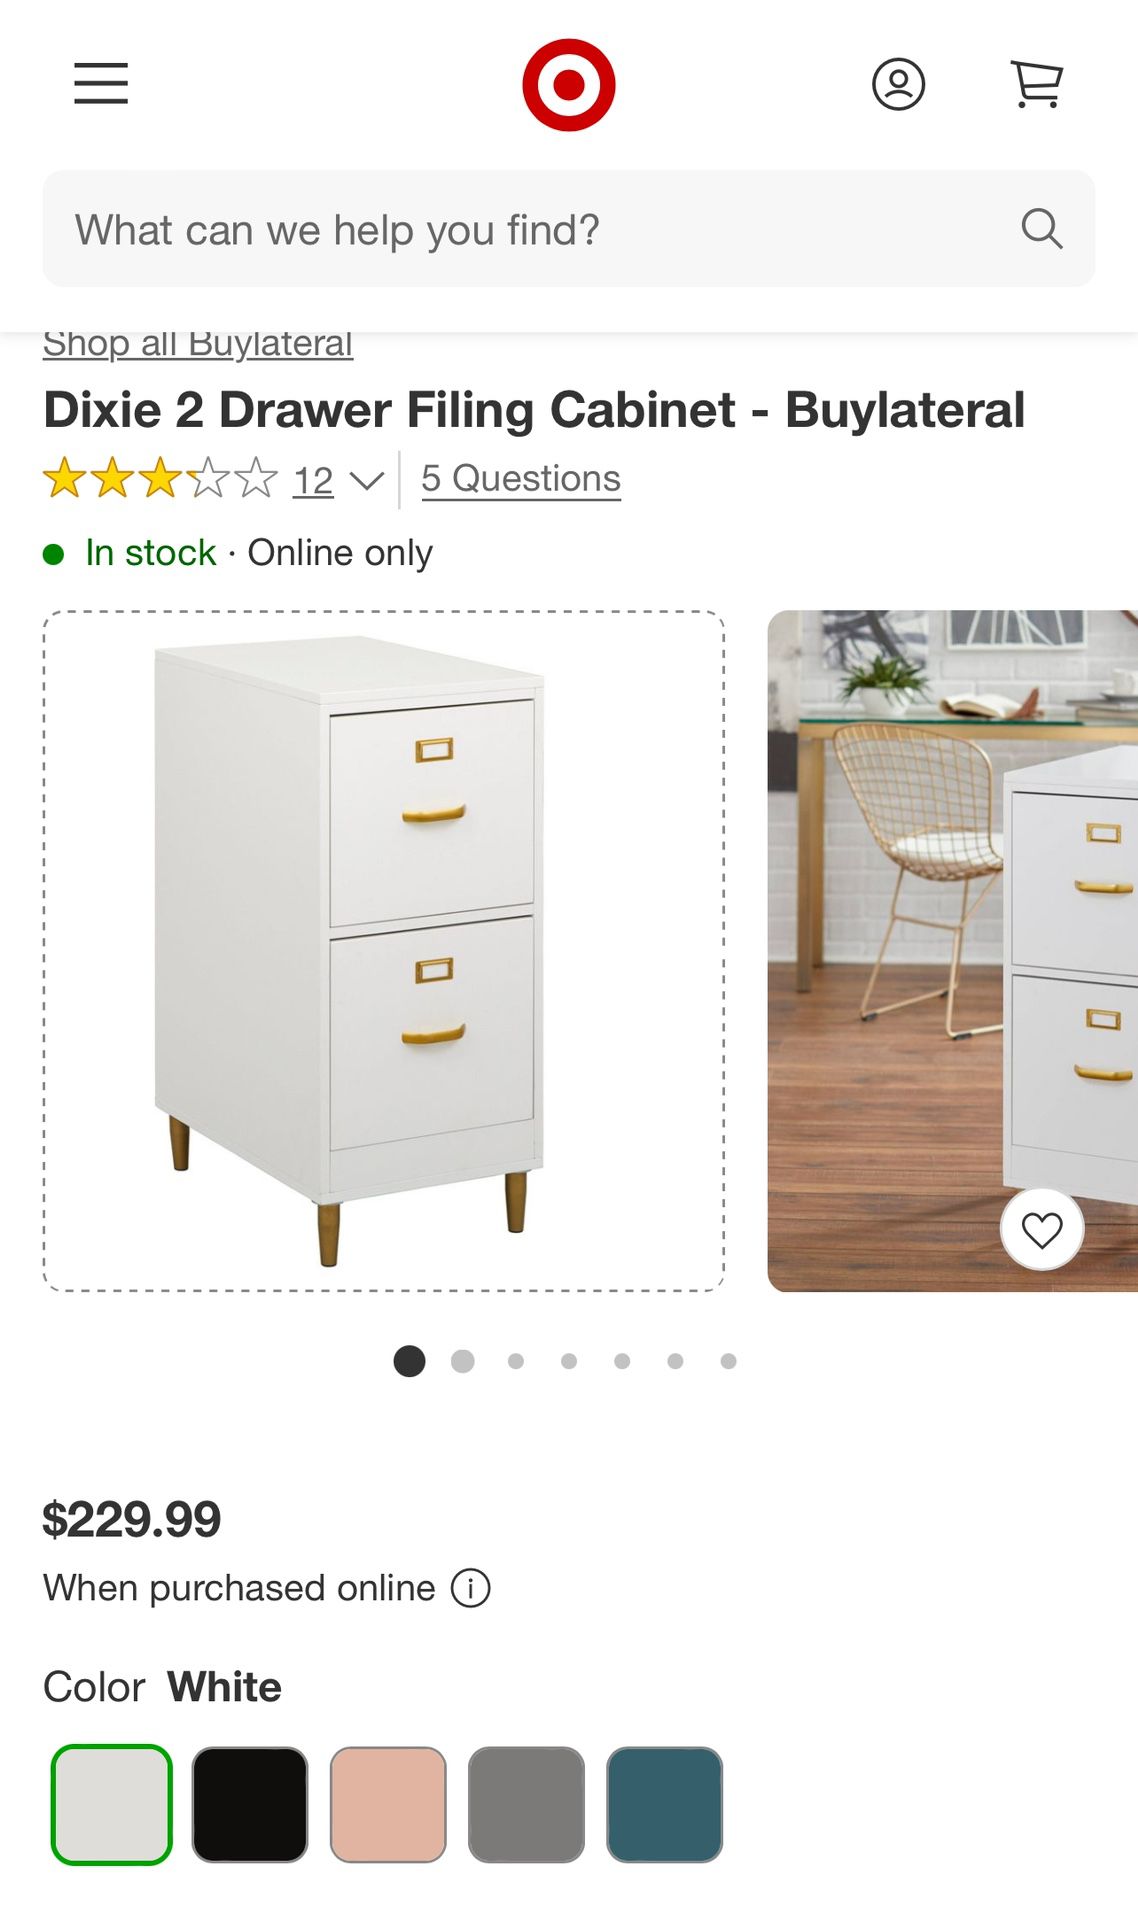 Dixie 2 drawer filing cabinet